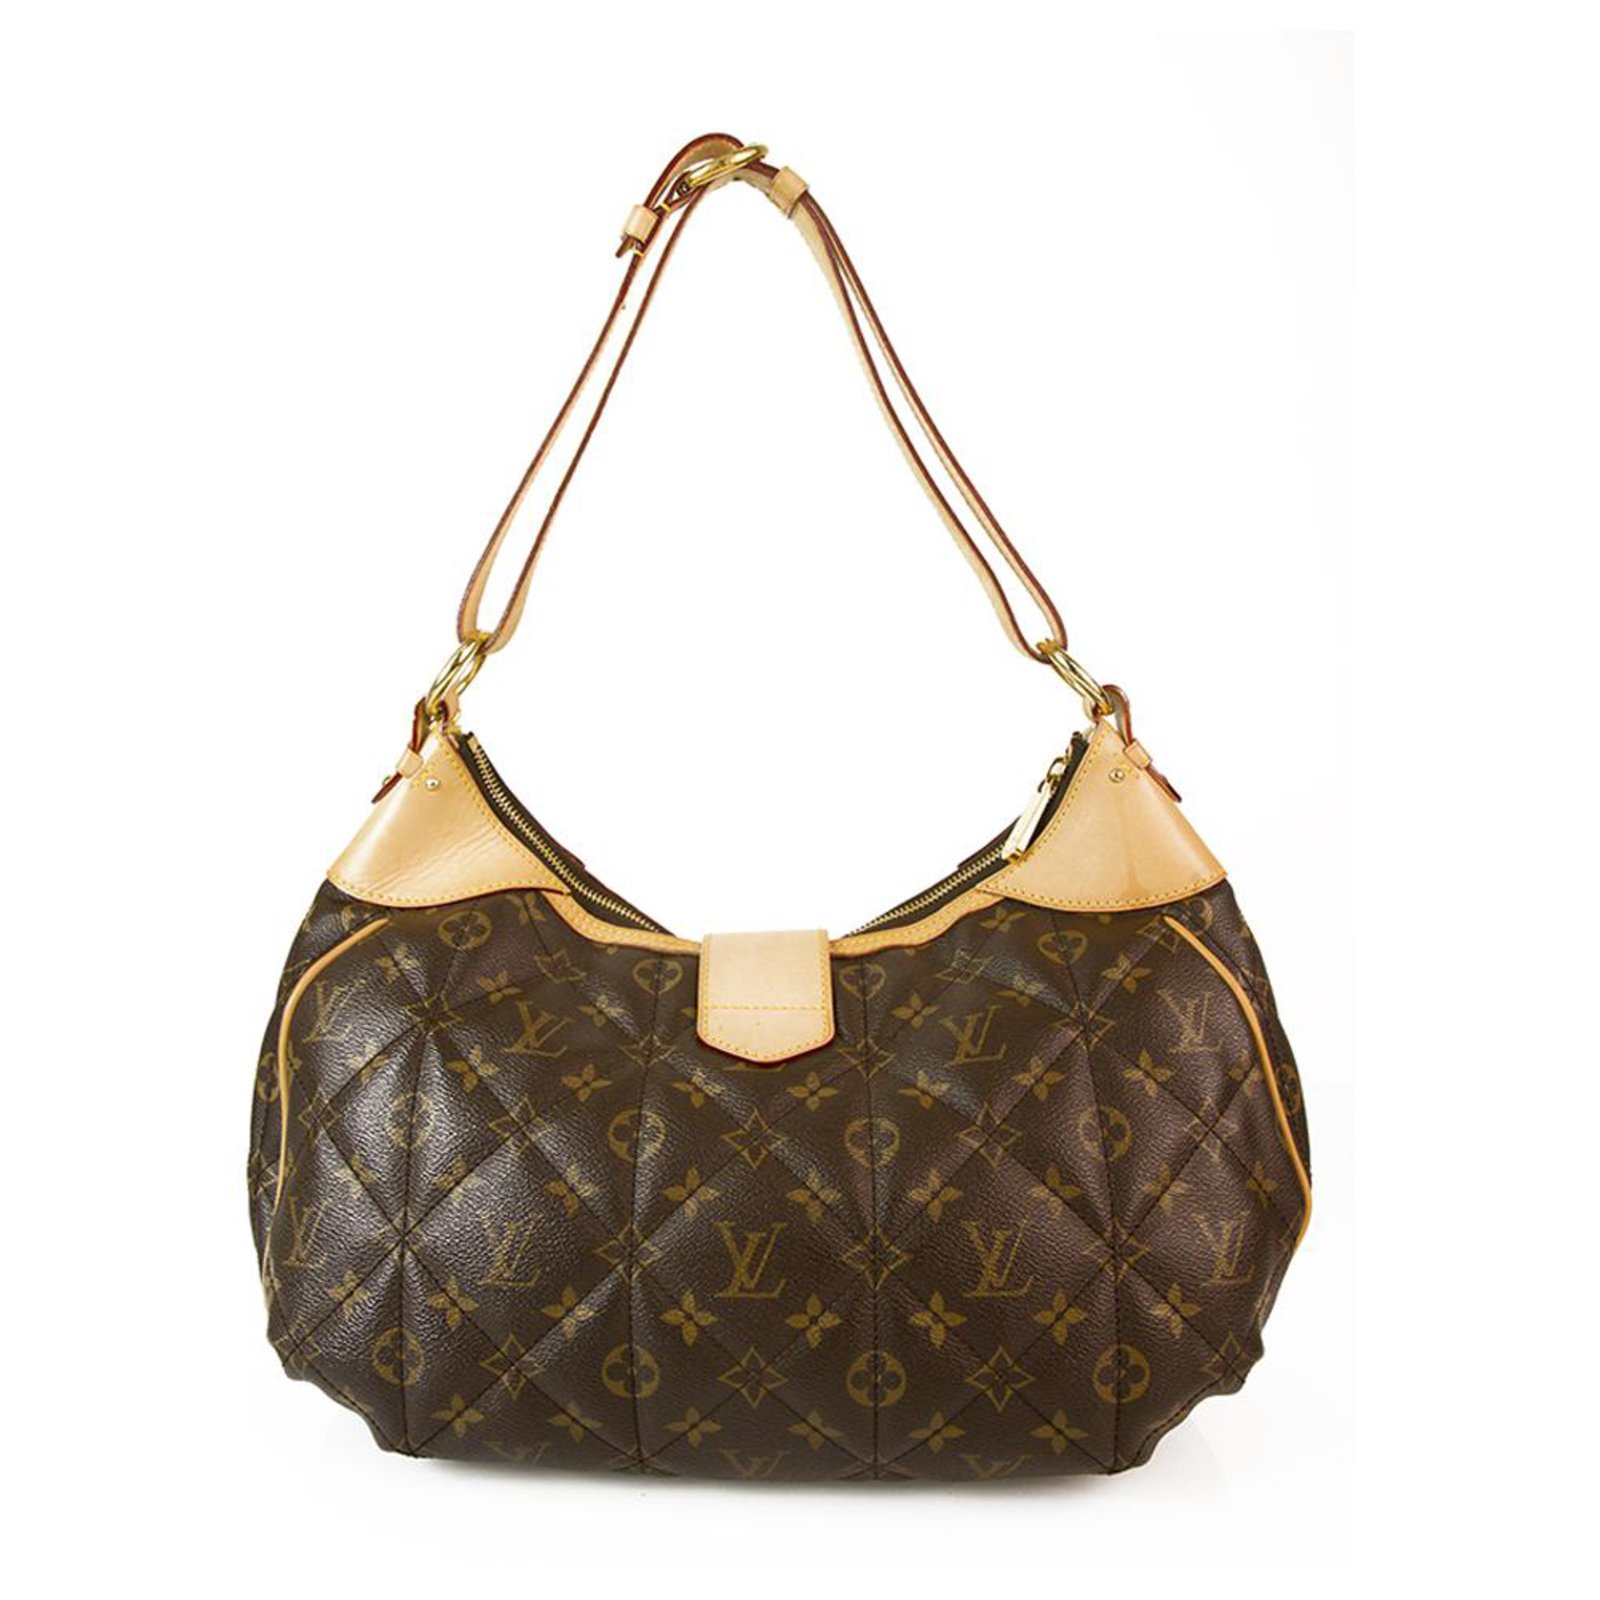 Louis Vuitton Monogram Quilted Etoile City GM Shoulder Bag— now available  to shop online. #louisvuitton #retyche